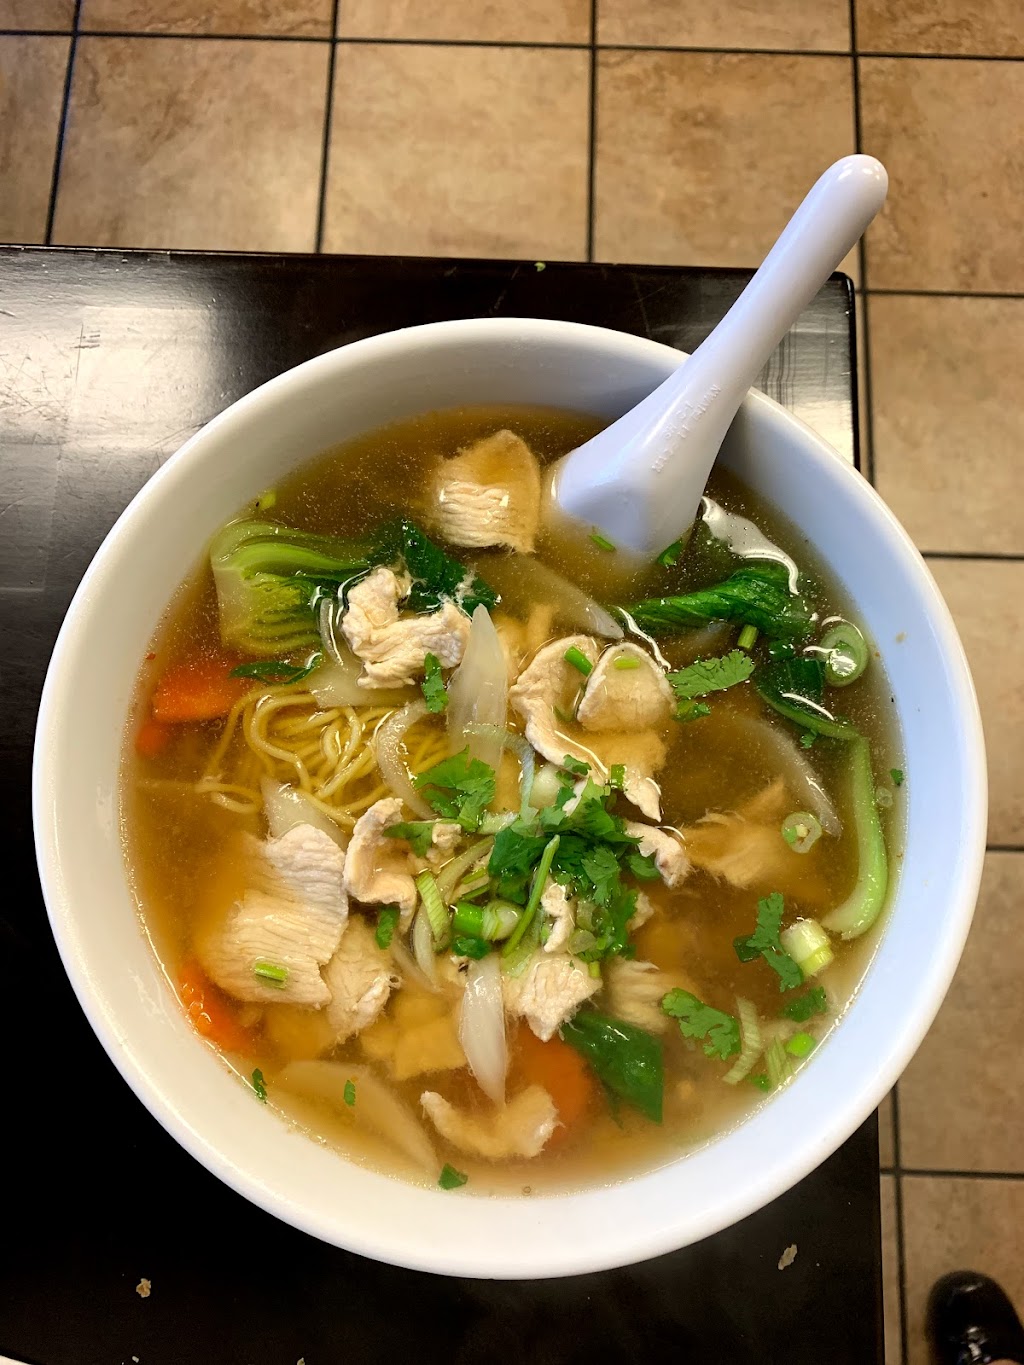 THE ASIAN INVASION Asian soups & foods | 1371 E Main St, Meriden, CT 06450 | Phone: (203) 235-2059